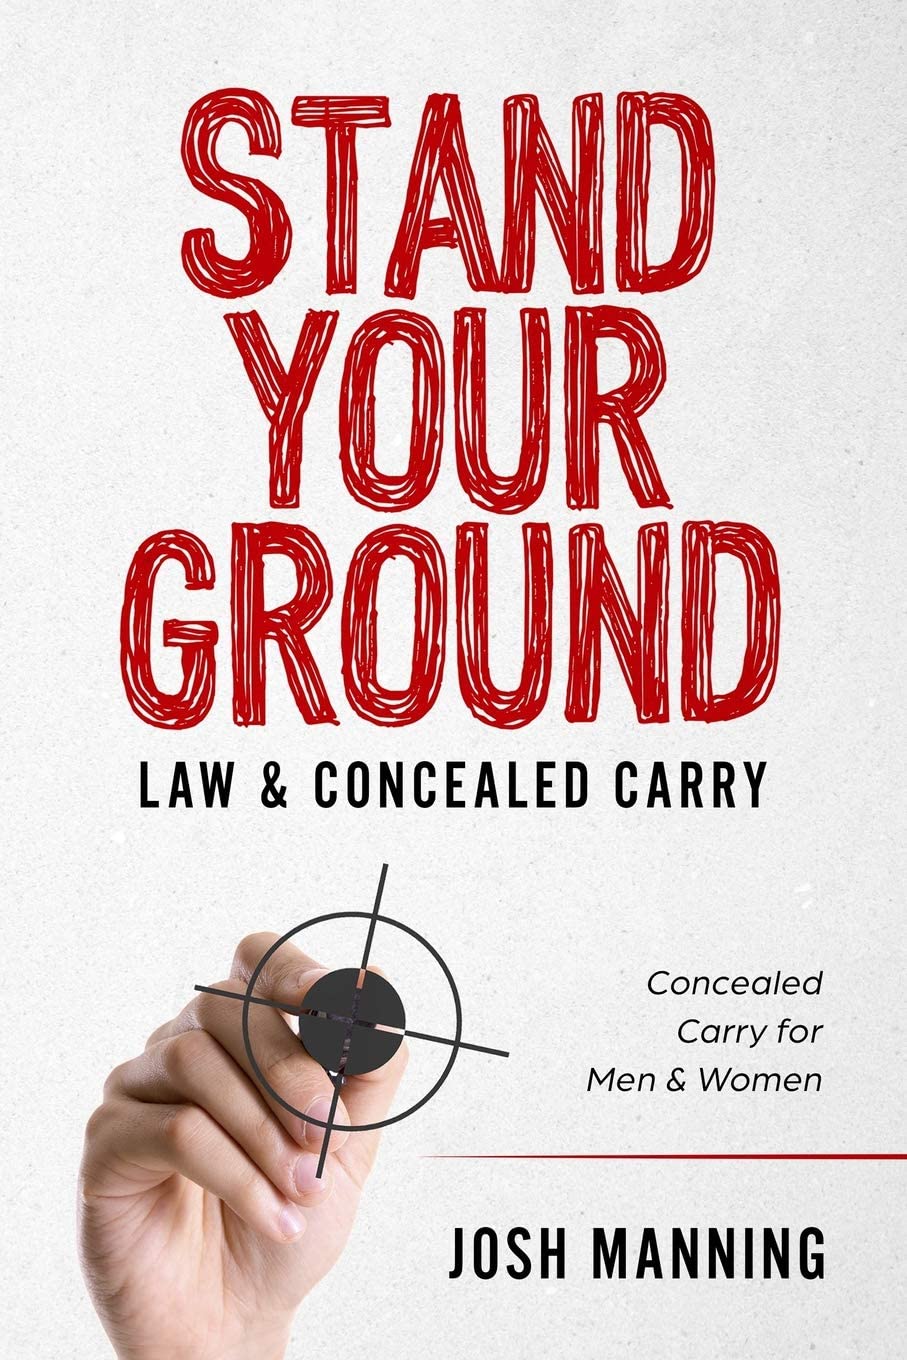 “Stand Your Ground” & Concealed Carry: Concealed Carry for Men & Women